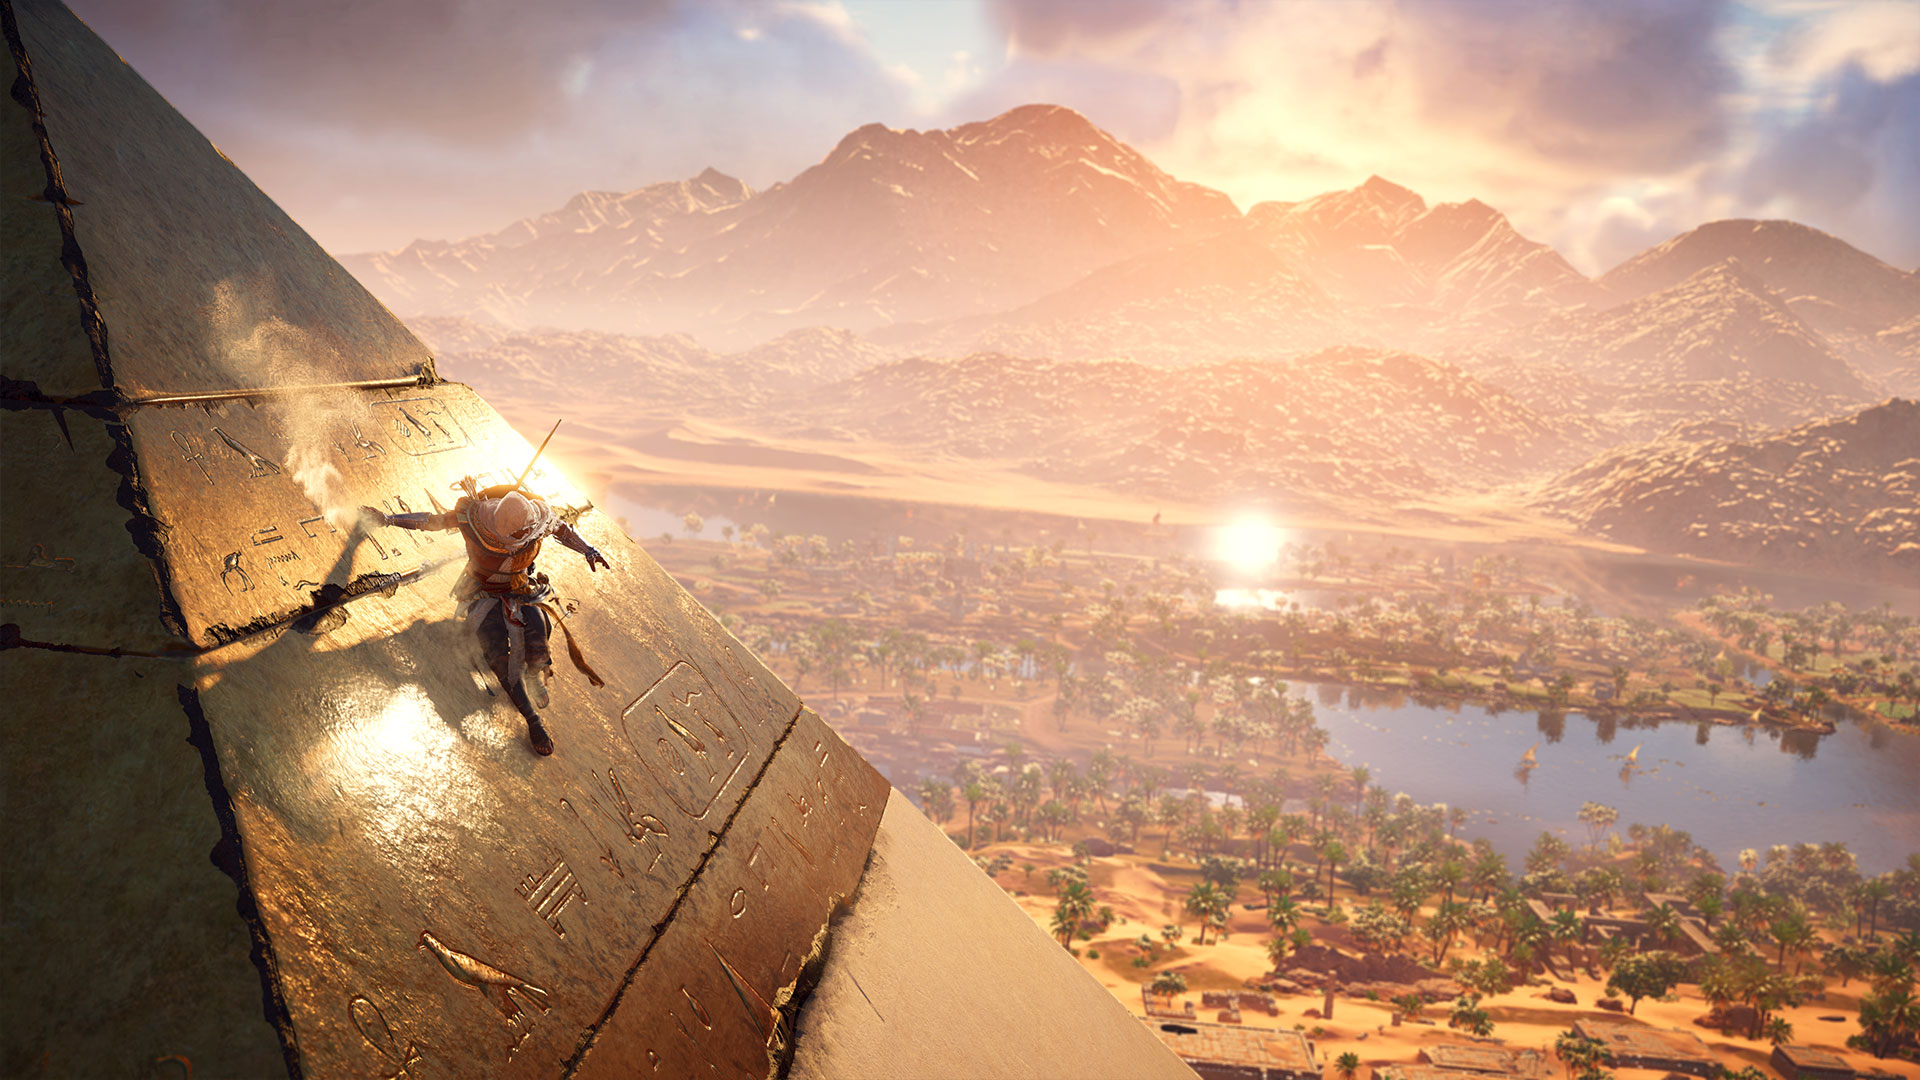 The Daily Crate | Exclusive: Interview with Andrien Gbinigie on Assassin's Creed Origins!